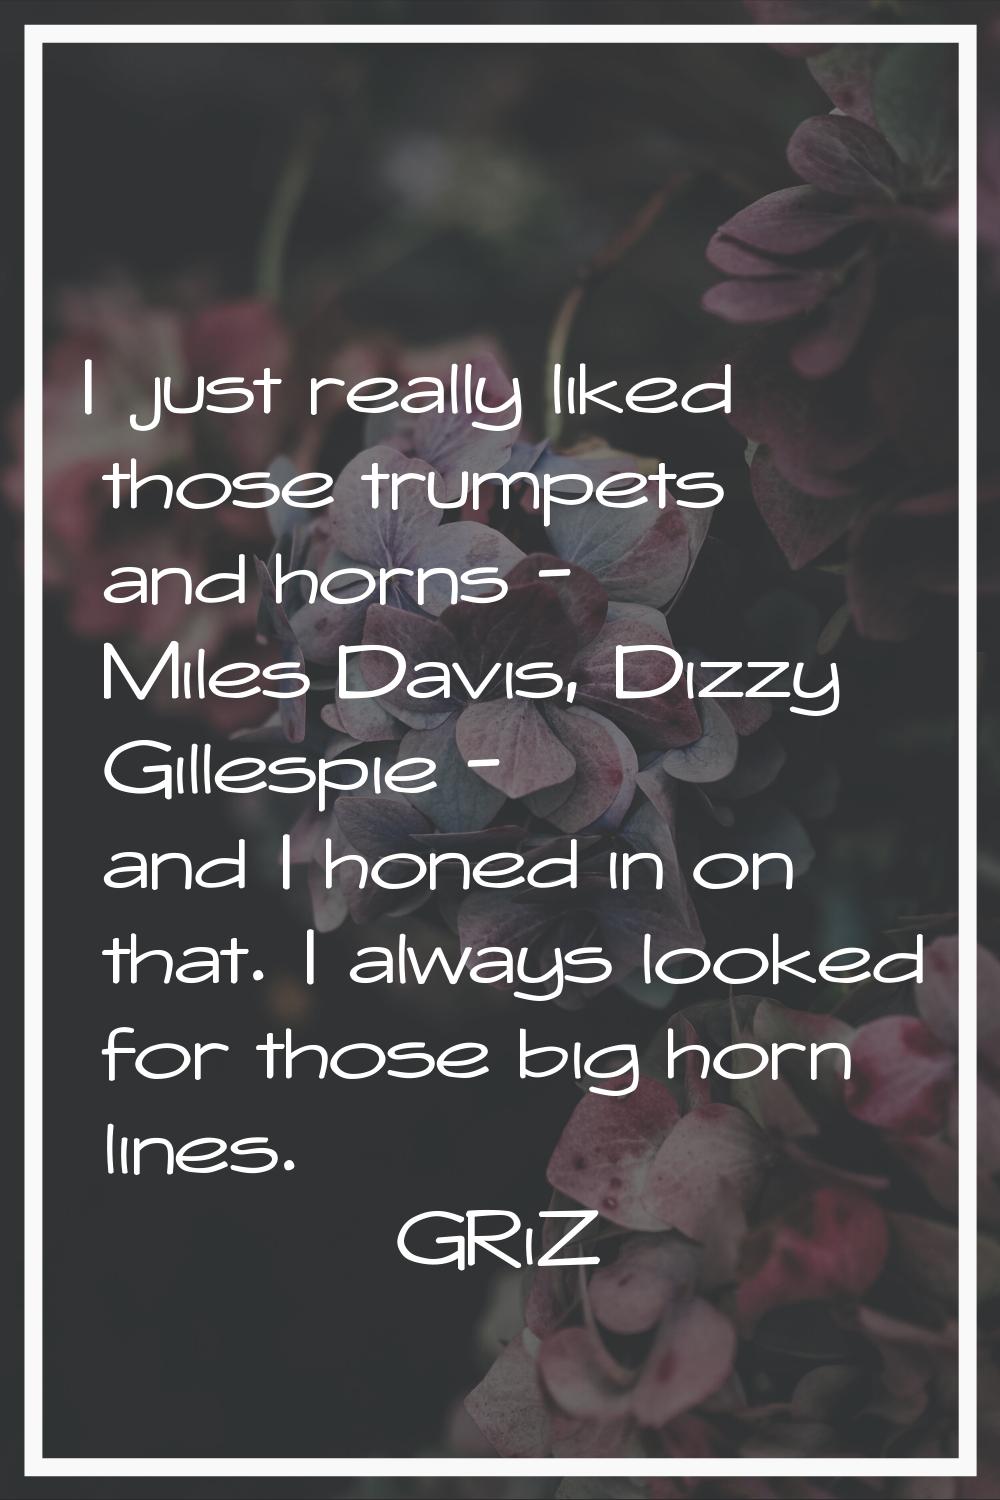 I just really liked those trumpets and horns - Miles Davis, Dizzy Gillespie - and I honed in on tha